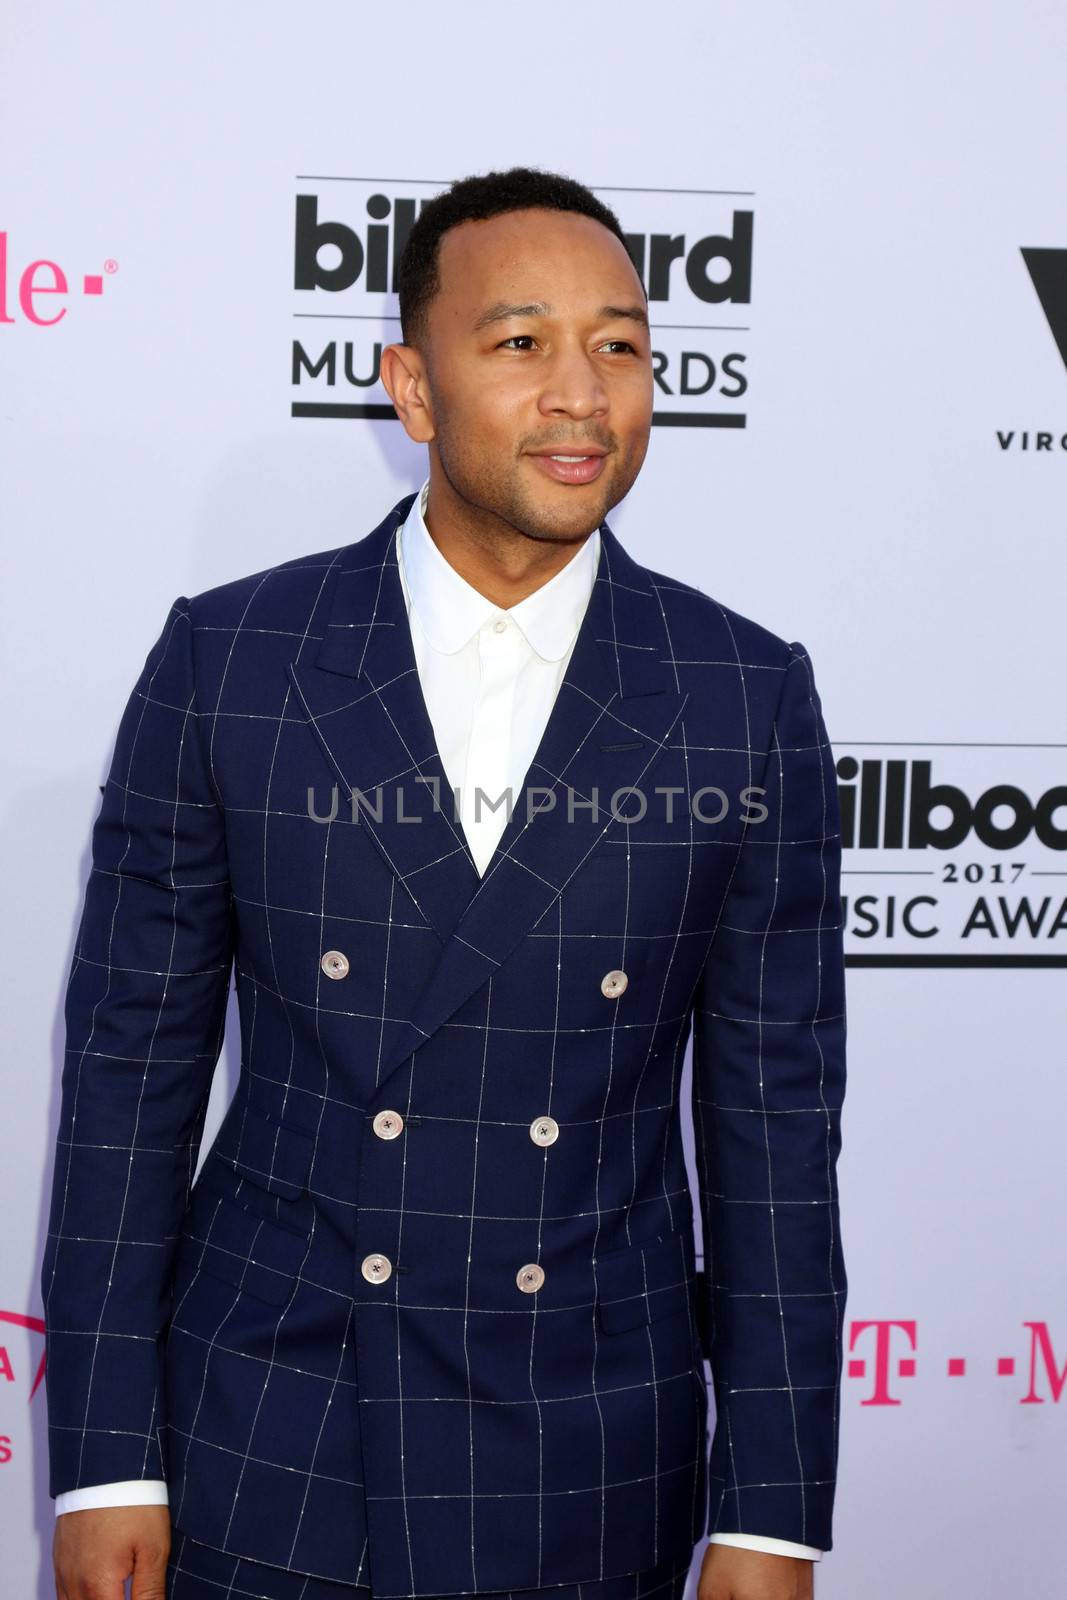 John Legend
at the 2017 Billboard Awards Arrivals, T-Mobile Arena, Las Vegas, NV 05-21-17/ImageCollect by ImageCollect